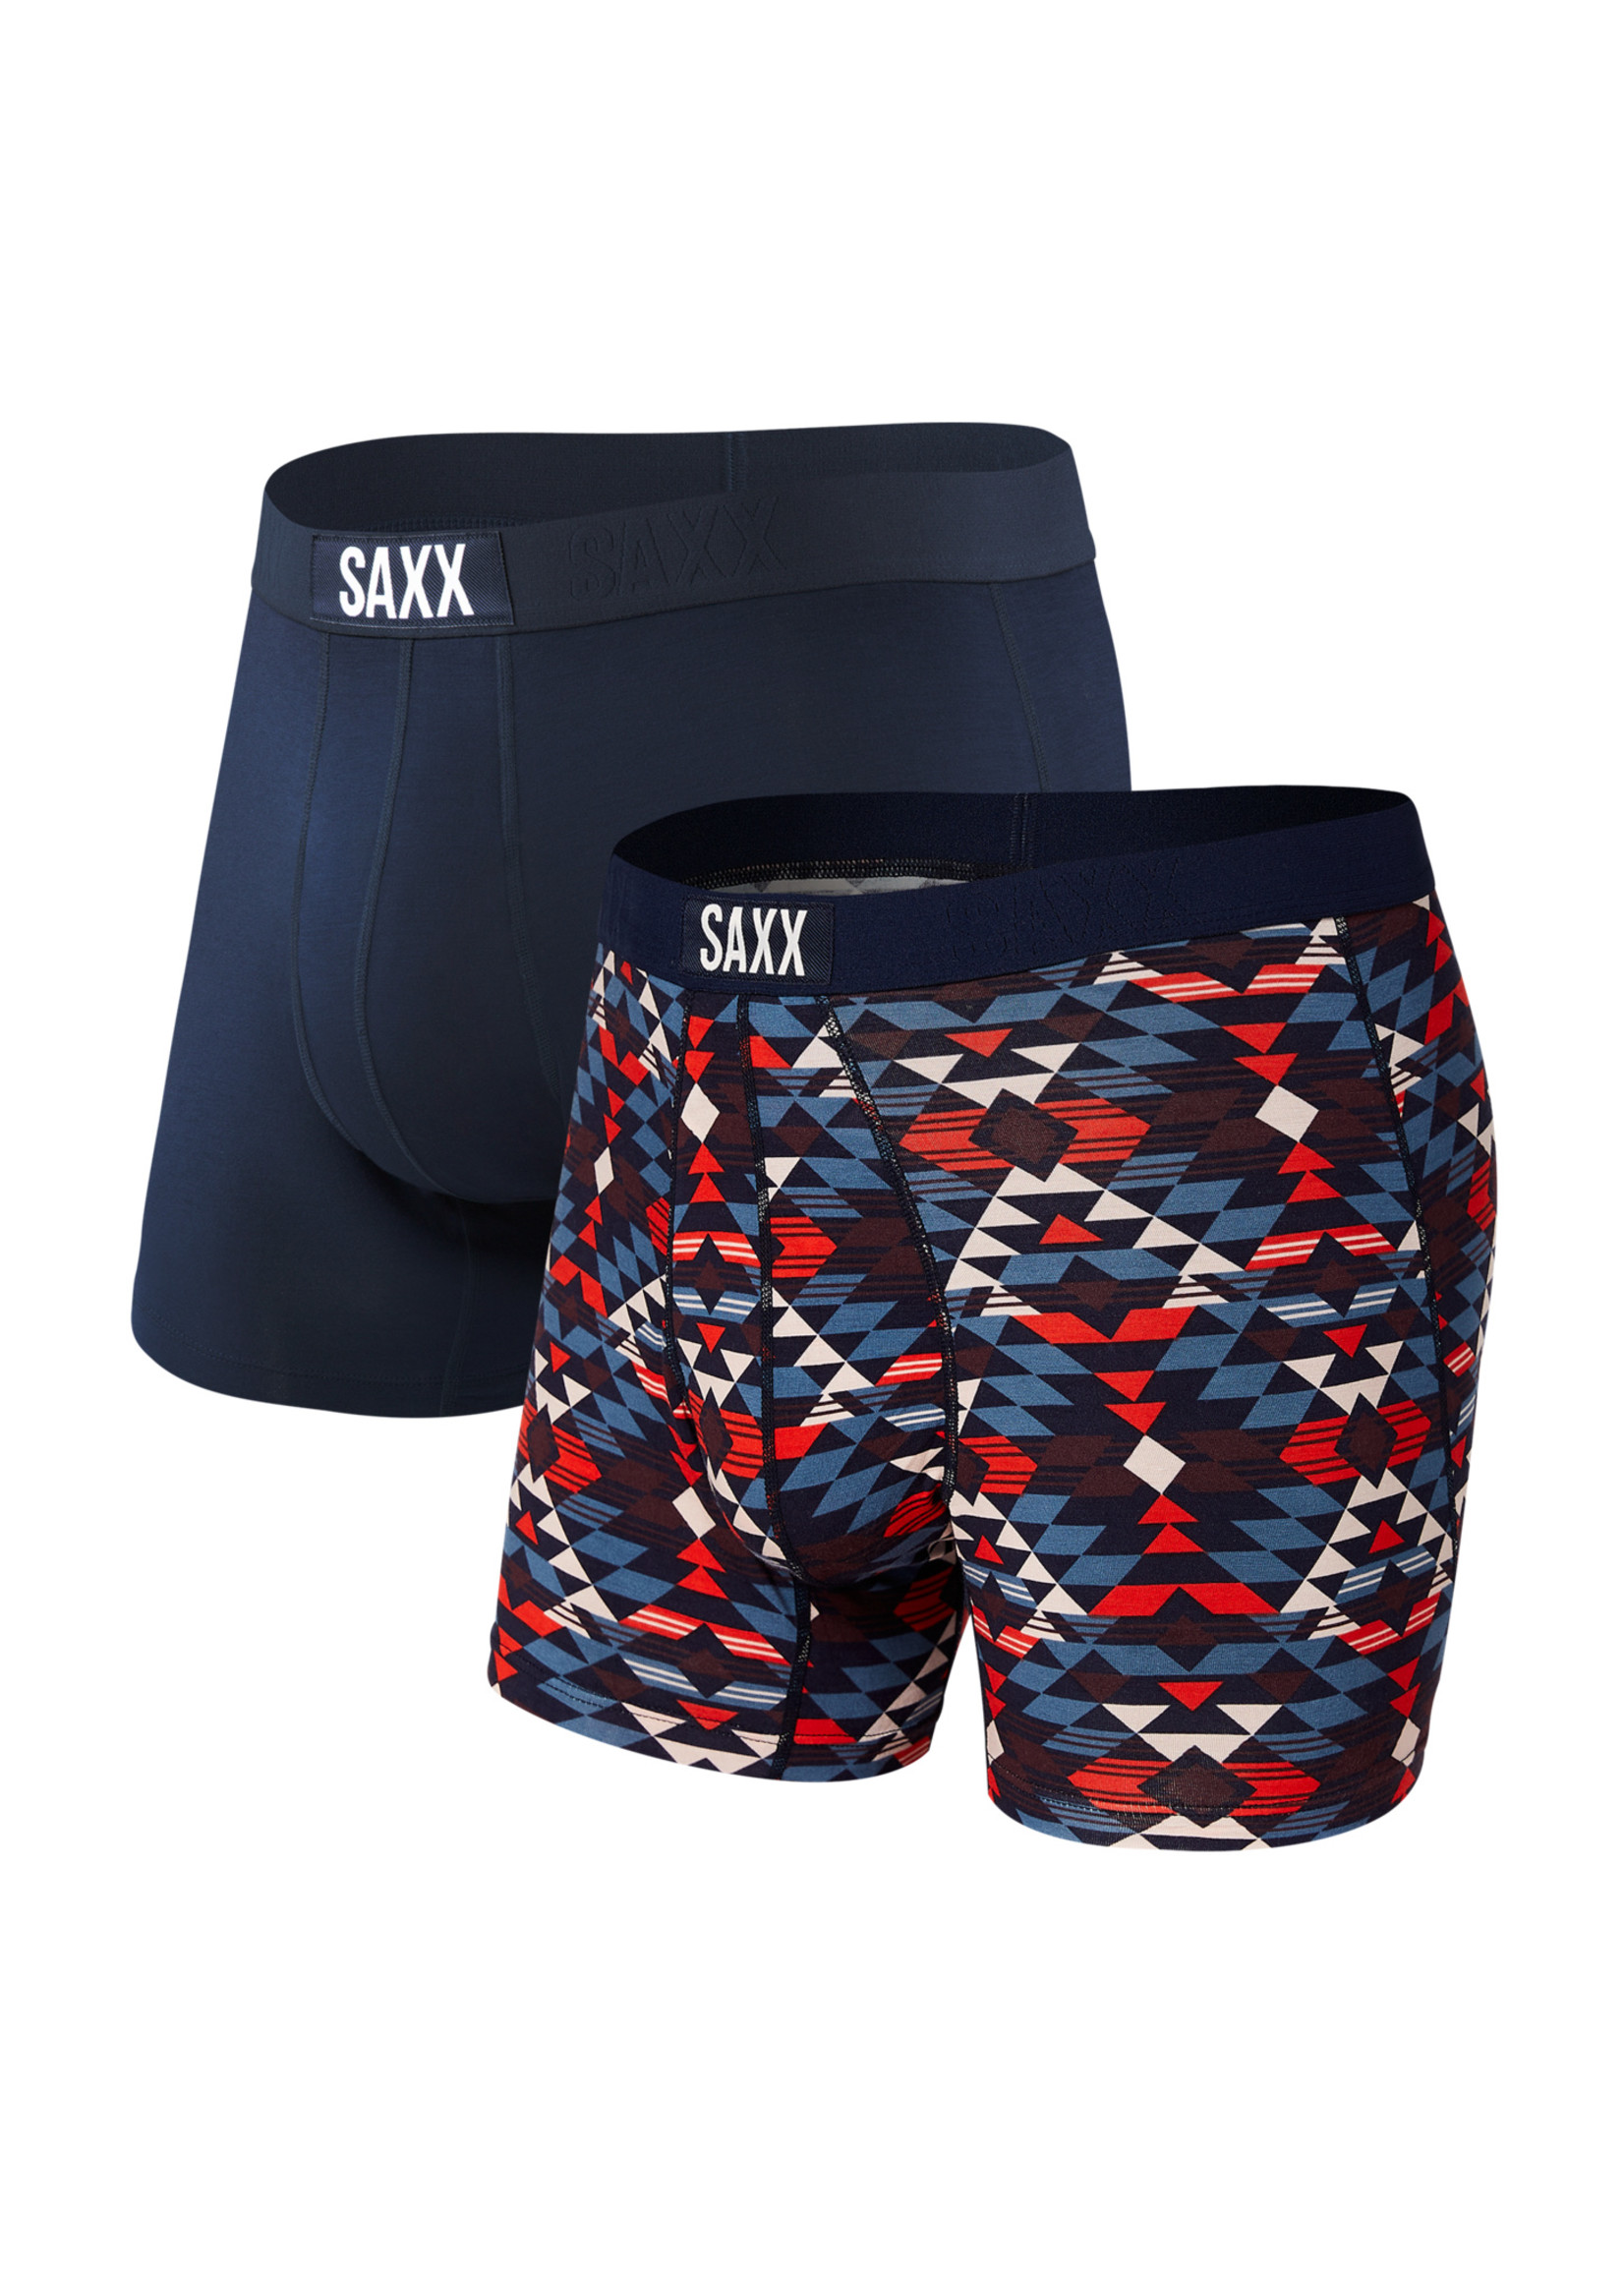 Saxx Vibe Boxer Brief 2-Pack